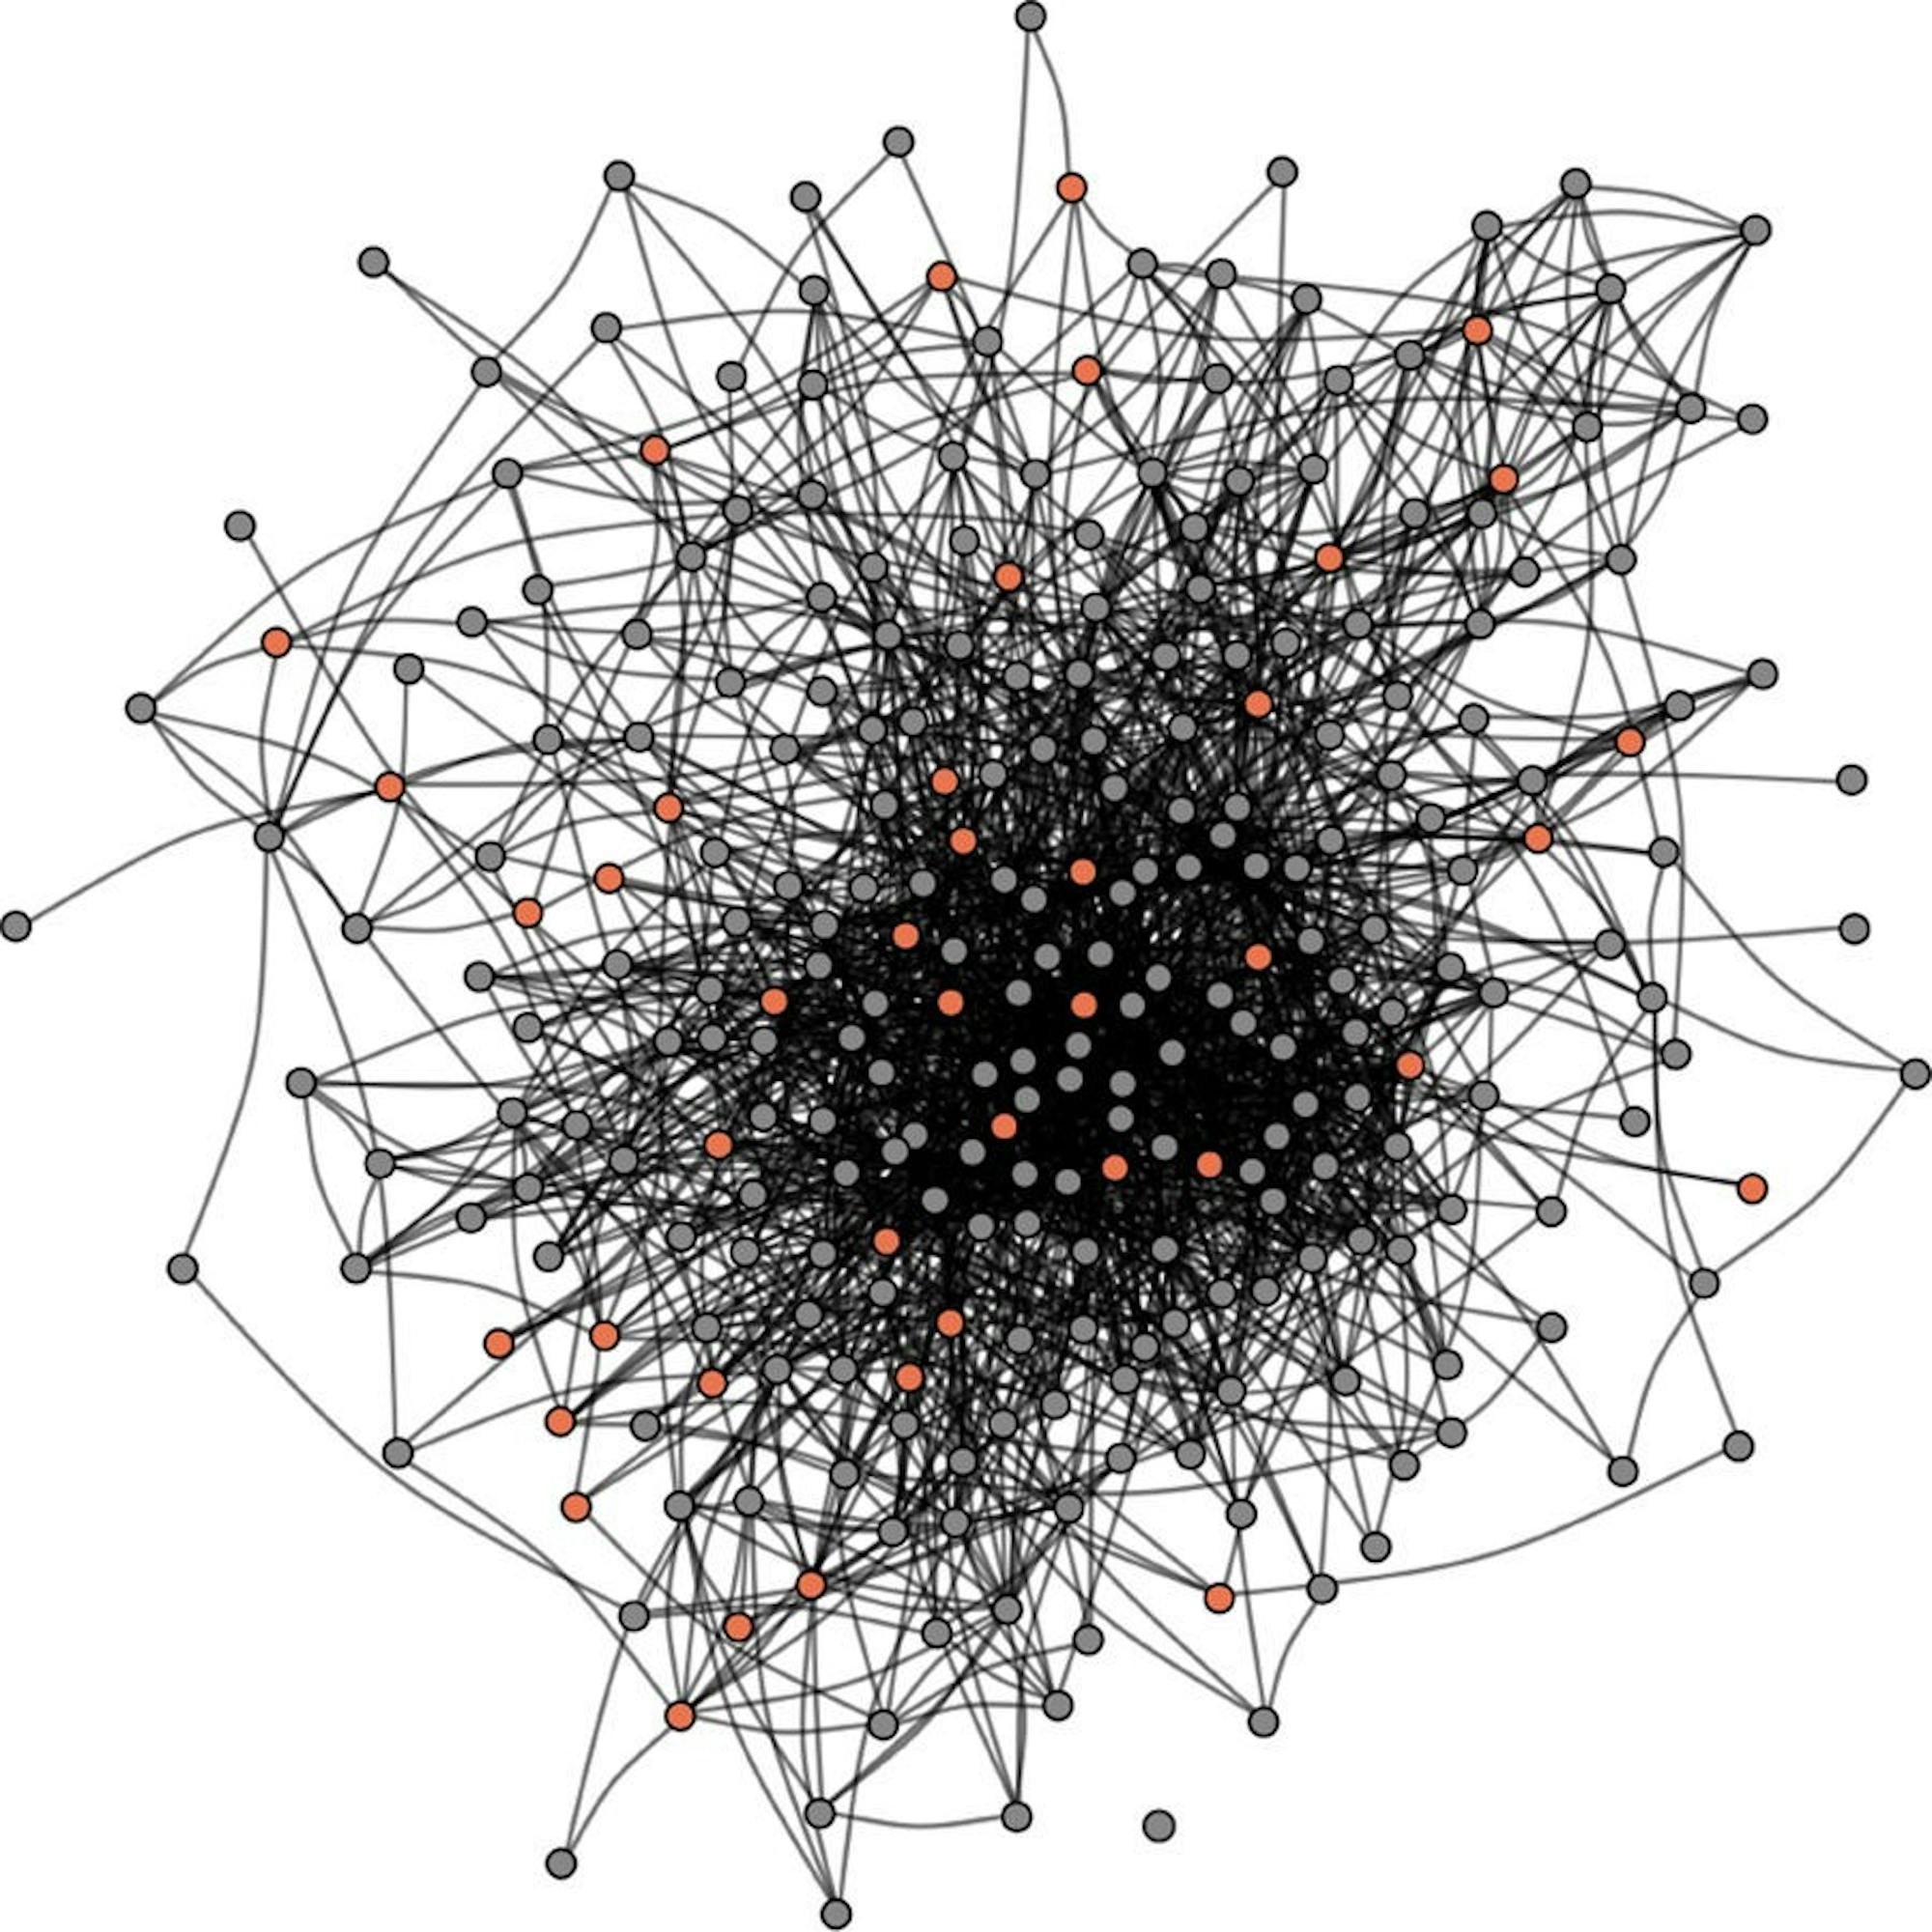 In the study, the social network of a group of 279 graduate students was mapped based on mutually reported social connections.